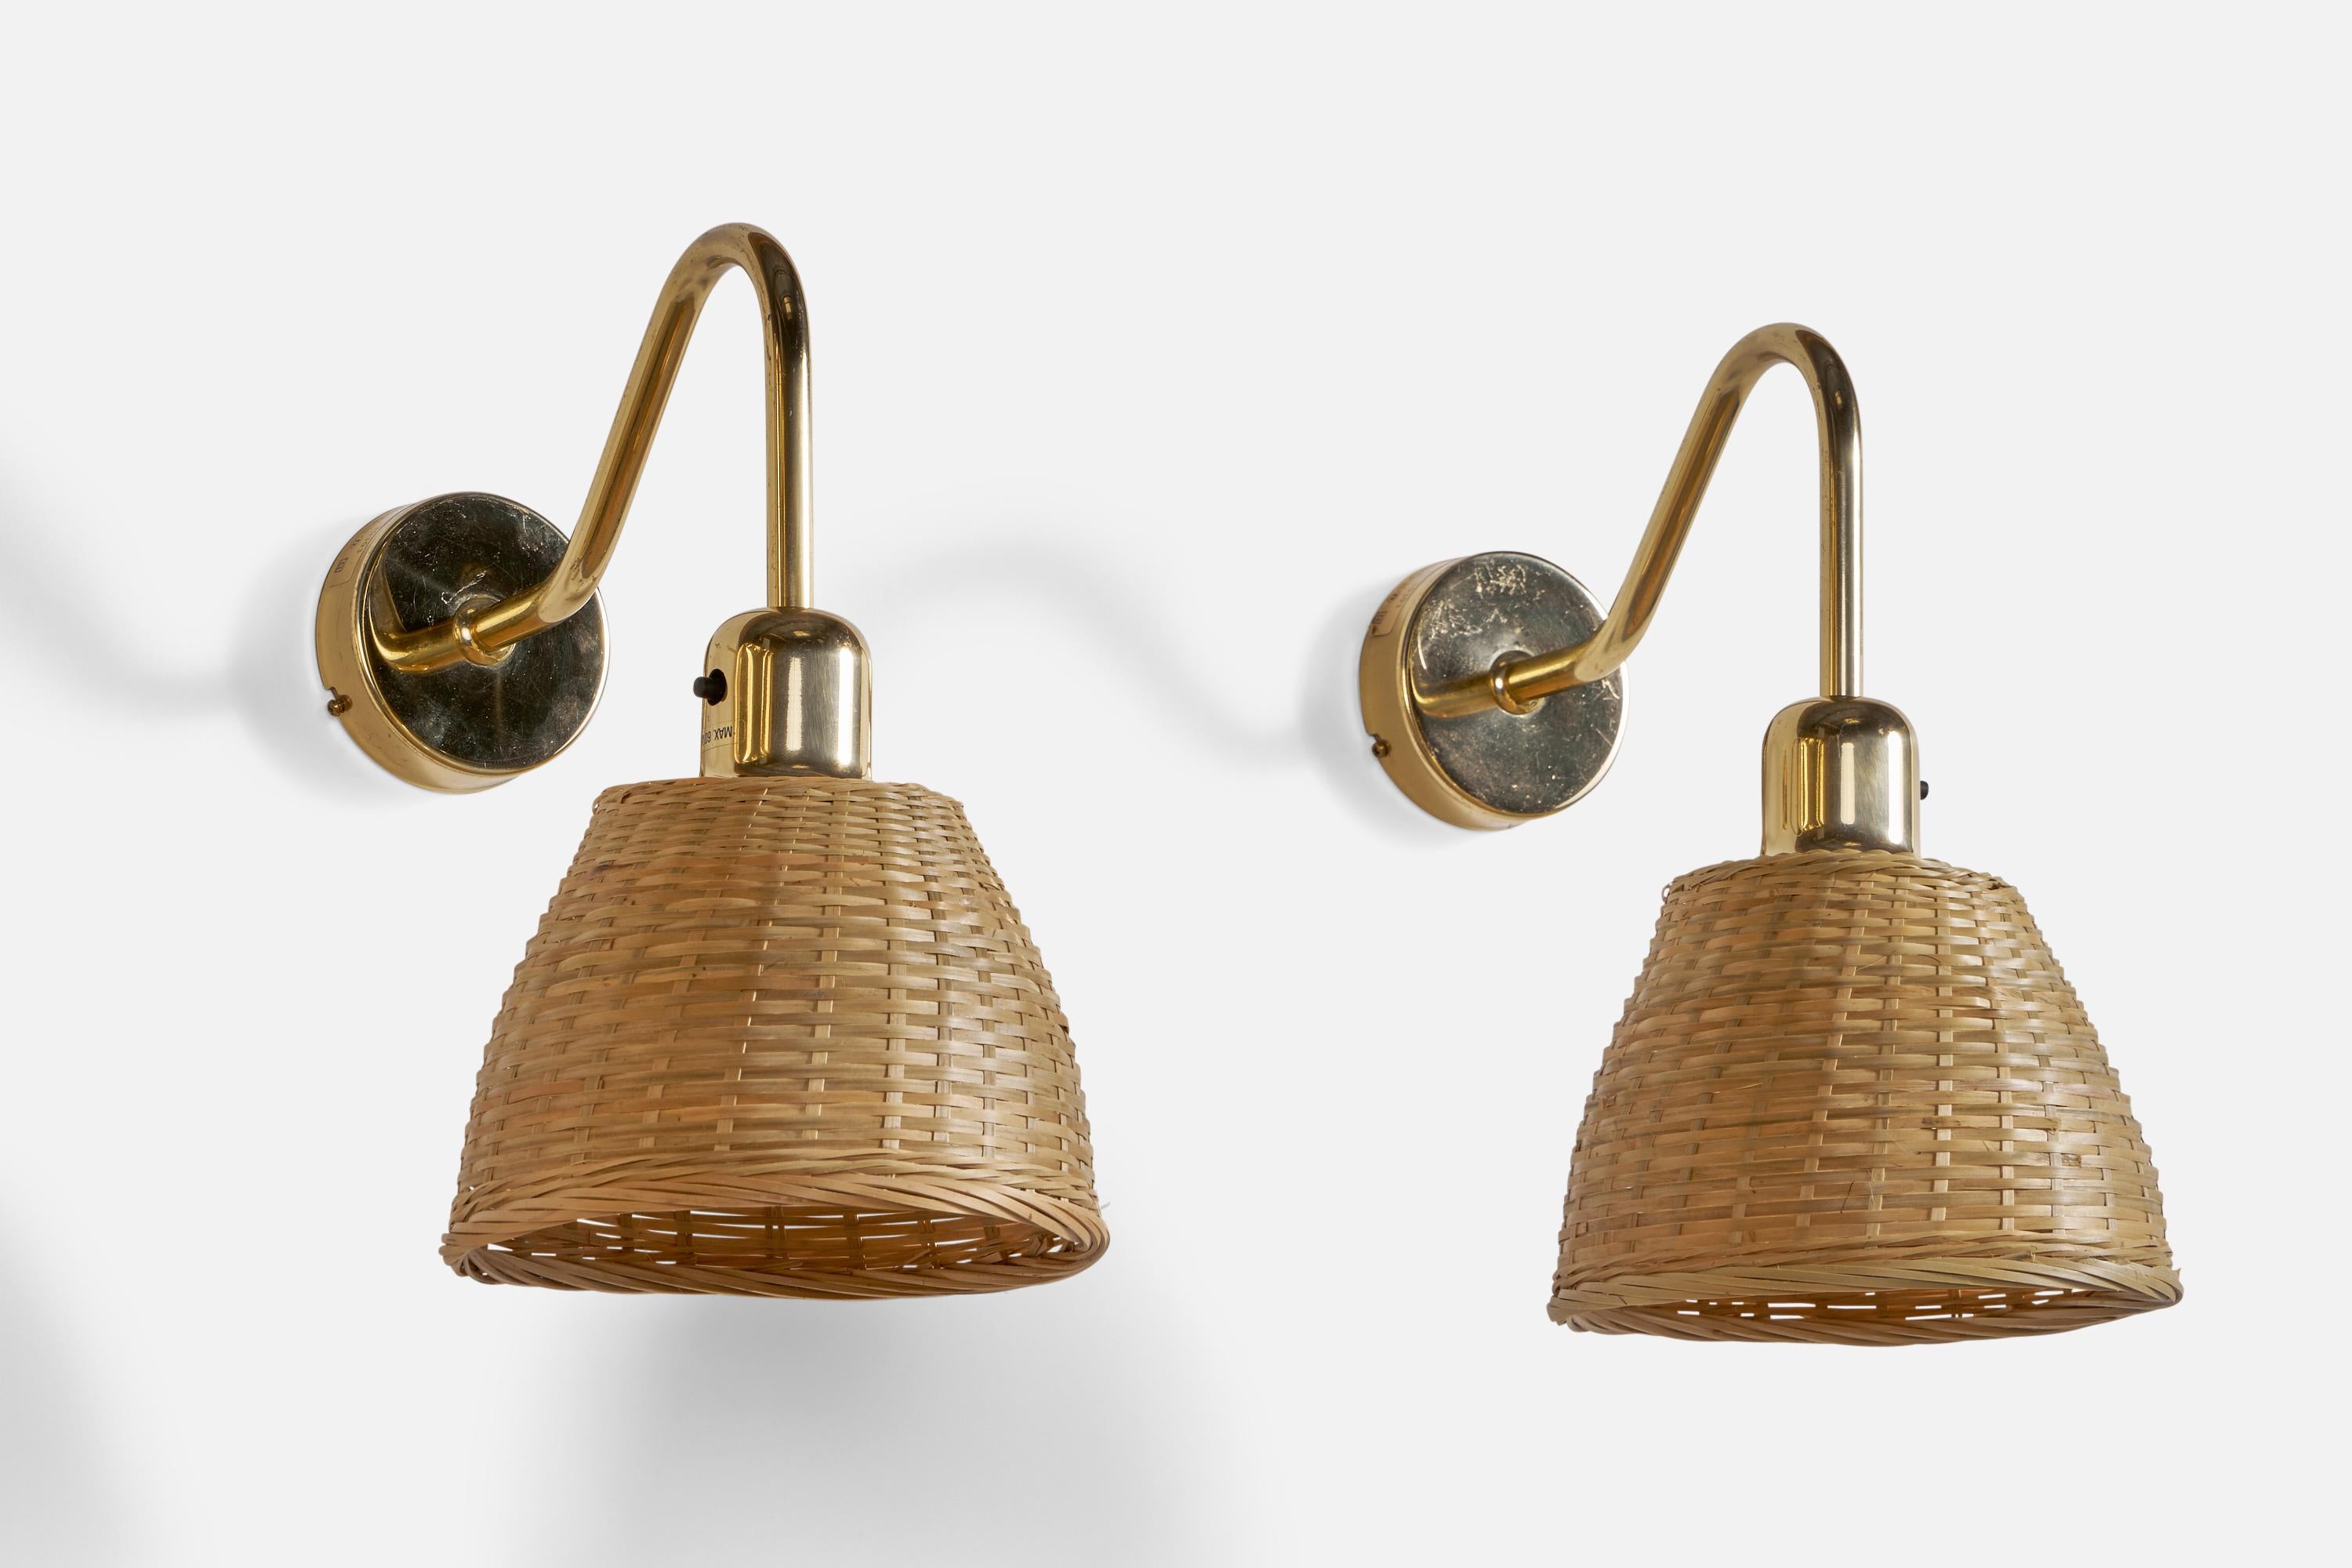 A pair of brass and rattan wall lights designed and produced by Orsjö Belysning, Sweden, c. 1970s.

Overall Dimensions (inches): 12” H x 7” W x 12” D
Back Plate Dimensions (inches): 3.36” Diameter x 1” Depth
Bulb Specifications: E-26 Bulbs
Number of